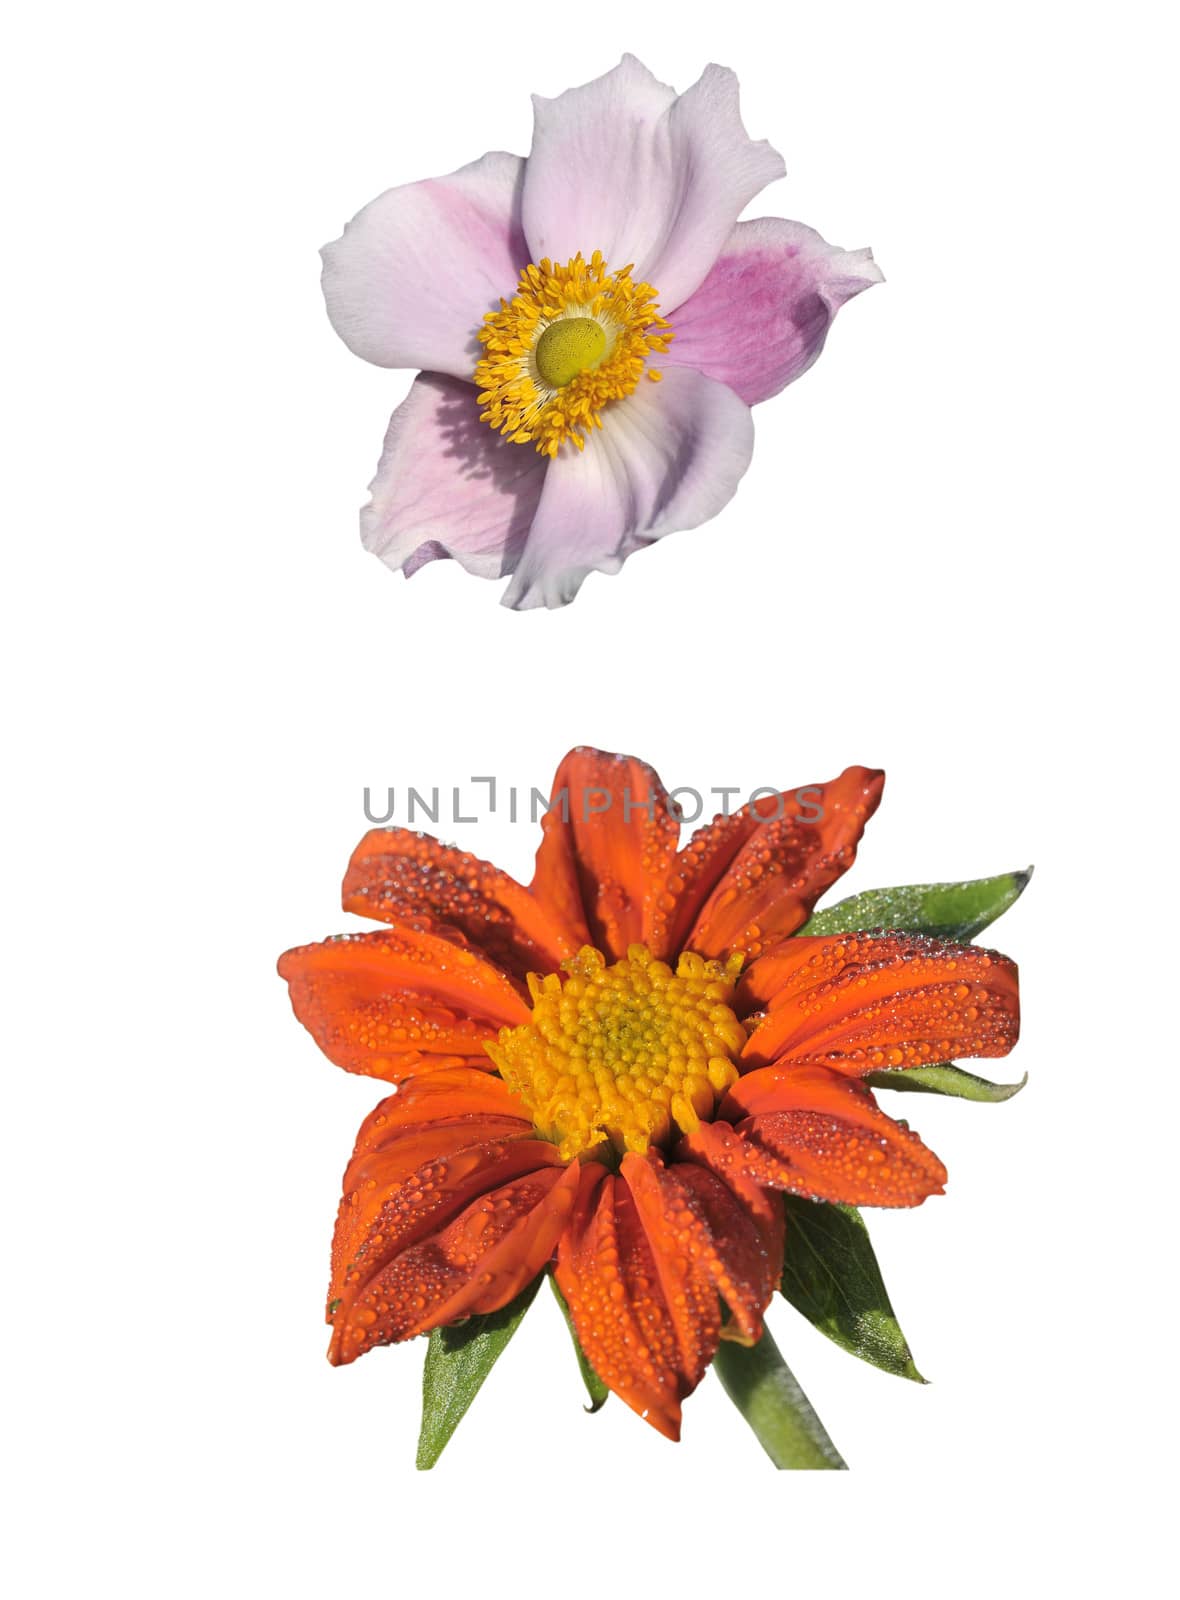 Anemone and Tithonia Speciosa isolated on white background